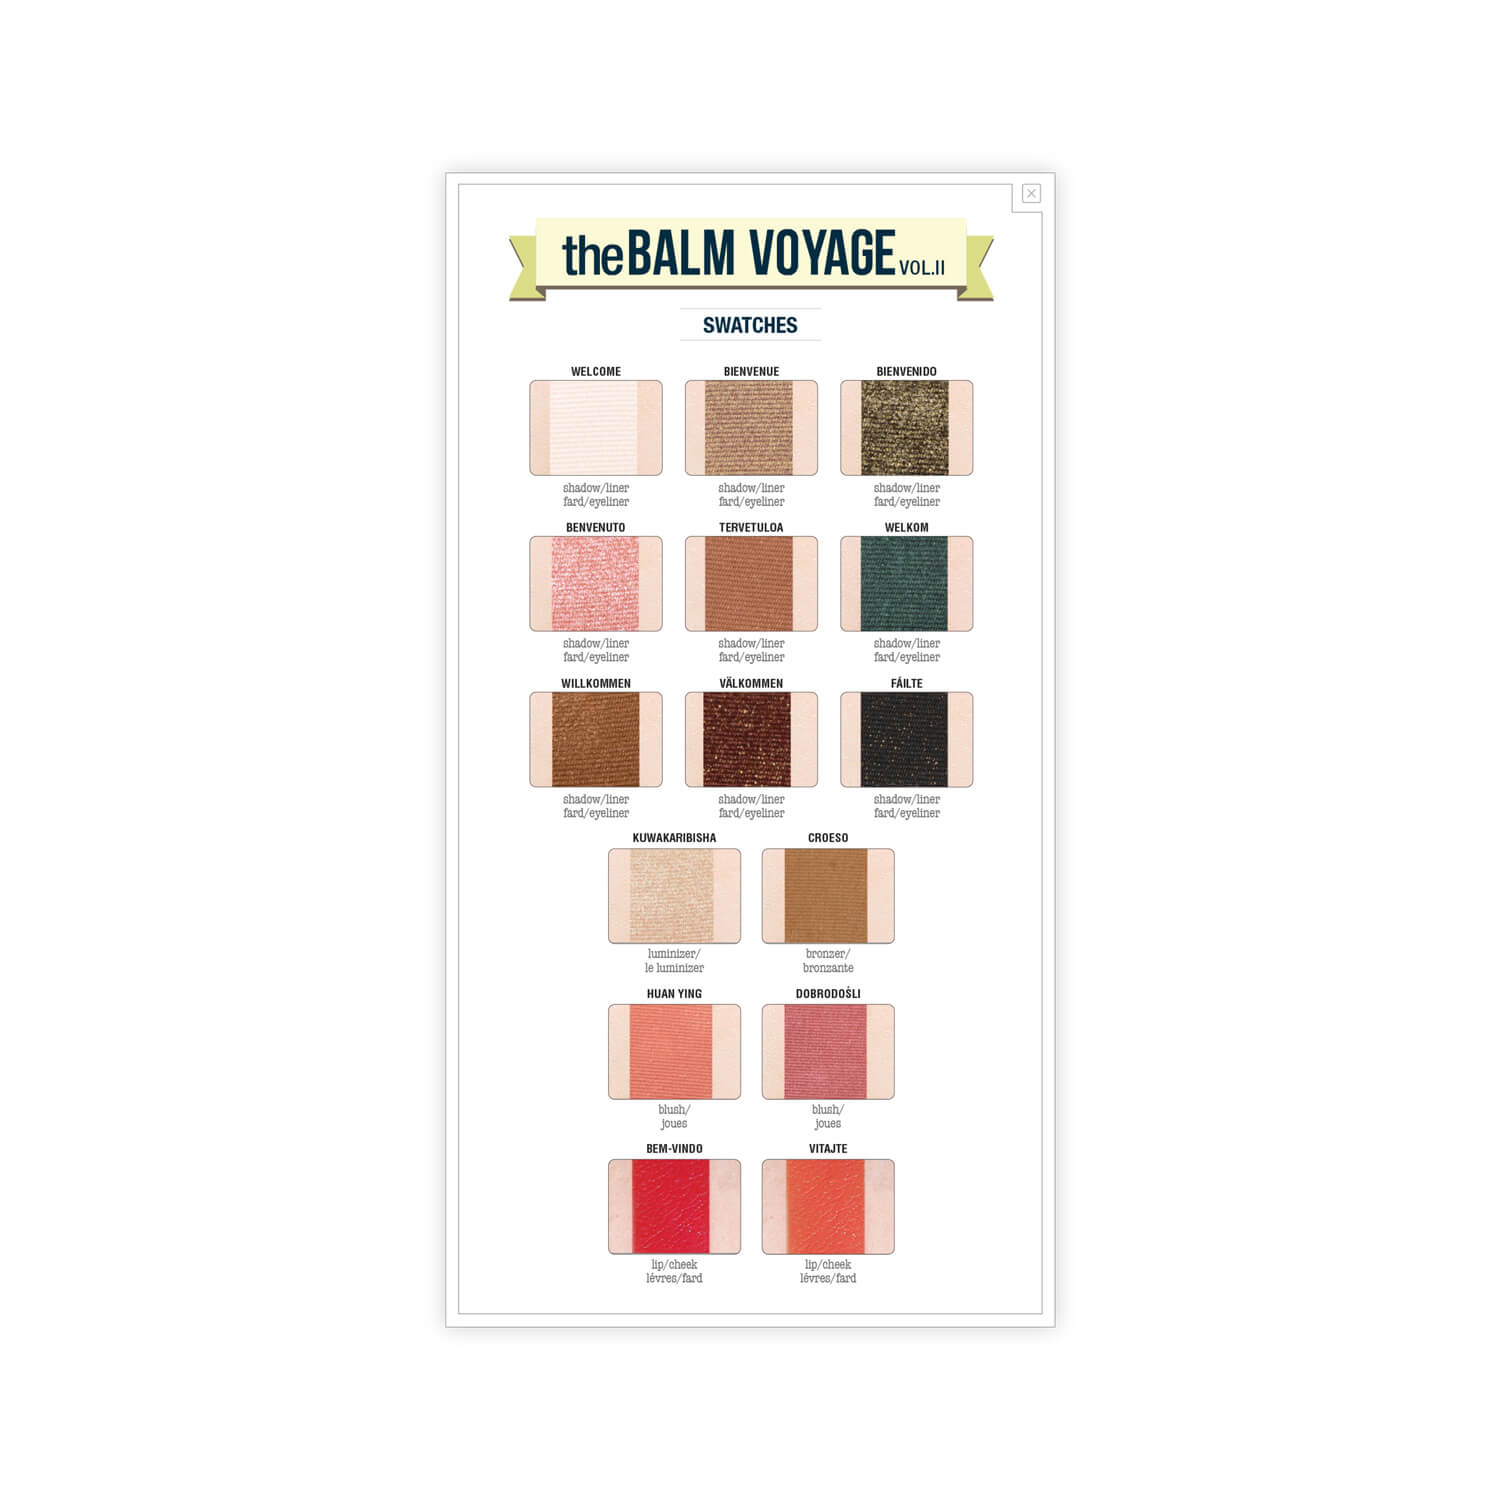 theBalm theBalm Voyage Vol 2 Face Palette Swatches